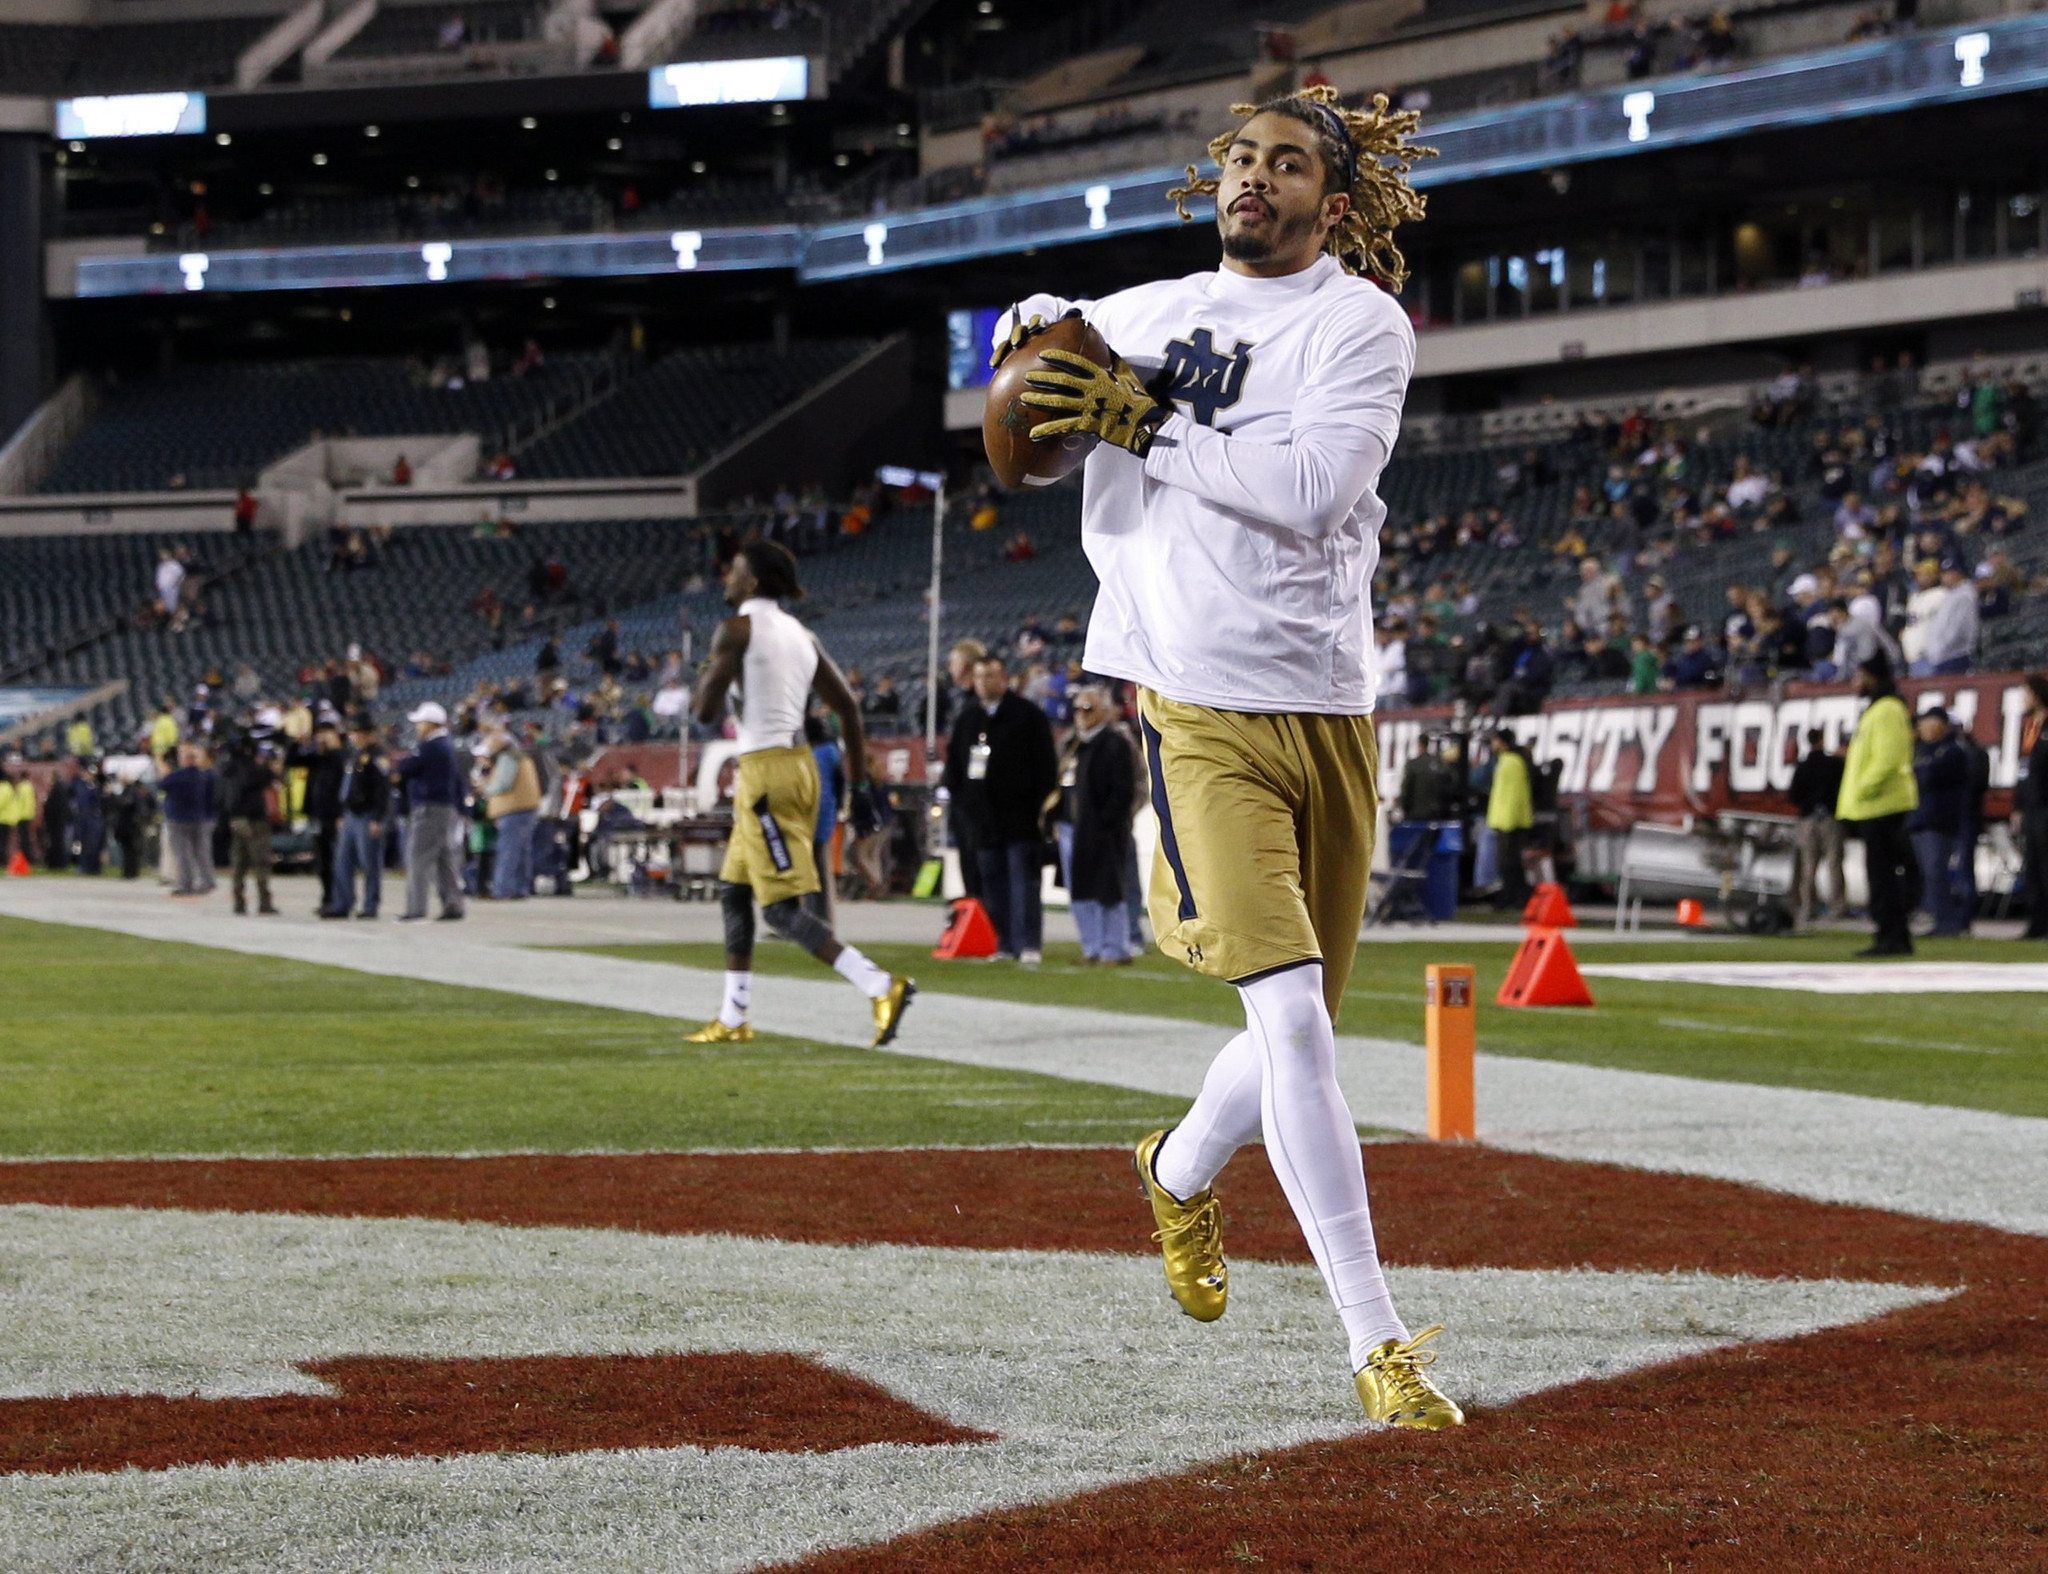 [Image: ct-football-notre-dame-will-fuller-jaylo...t-20151211]